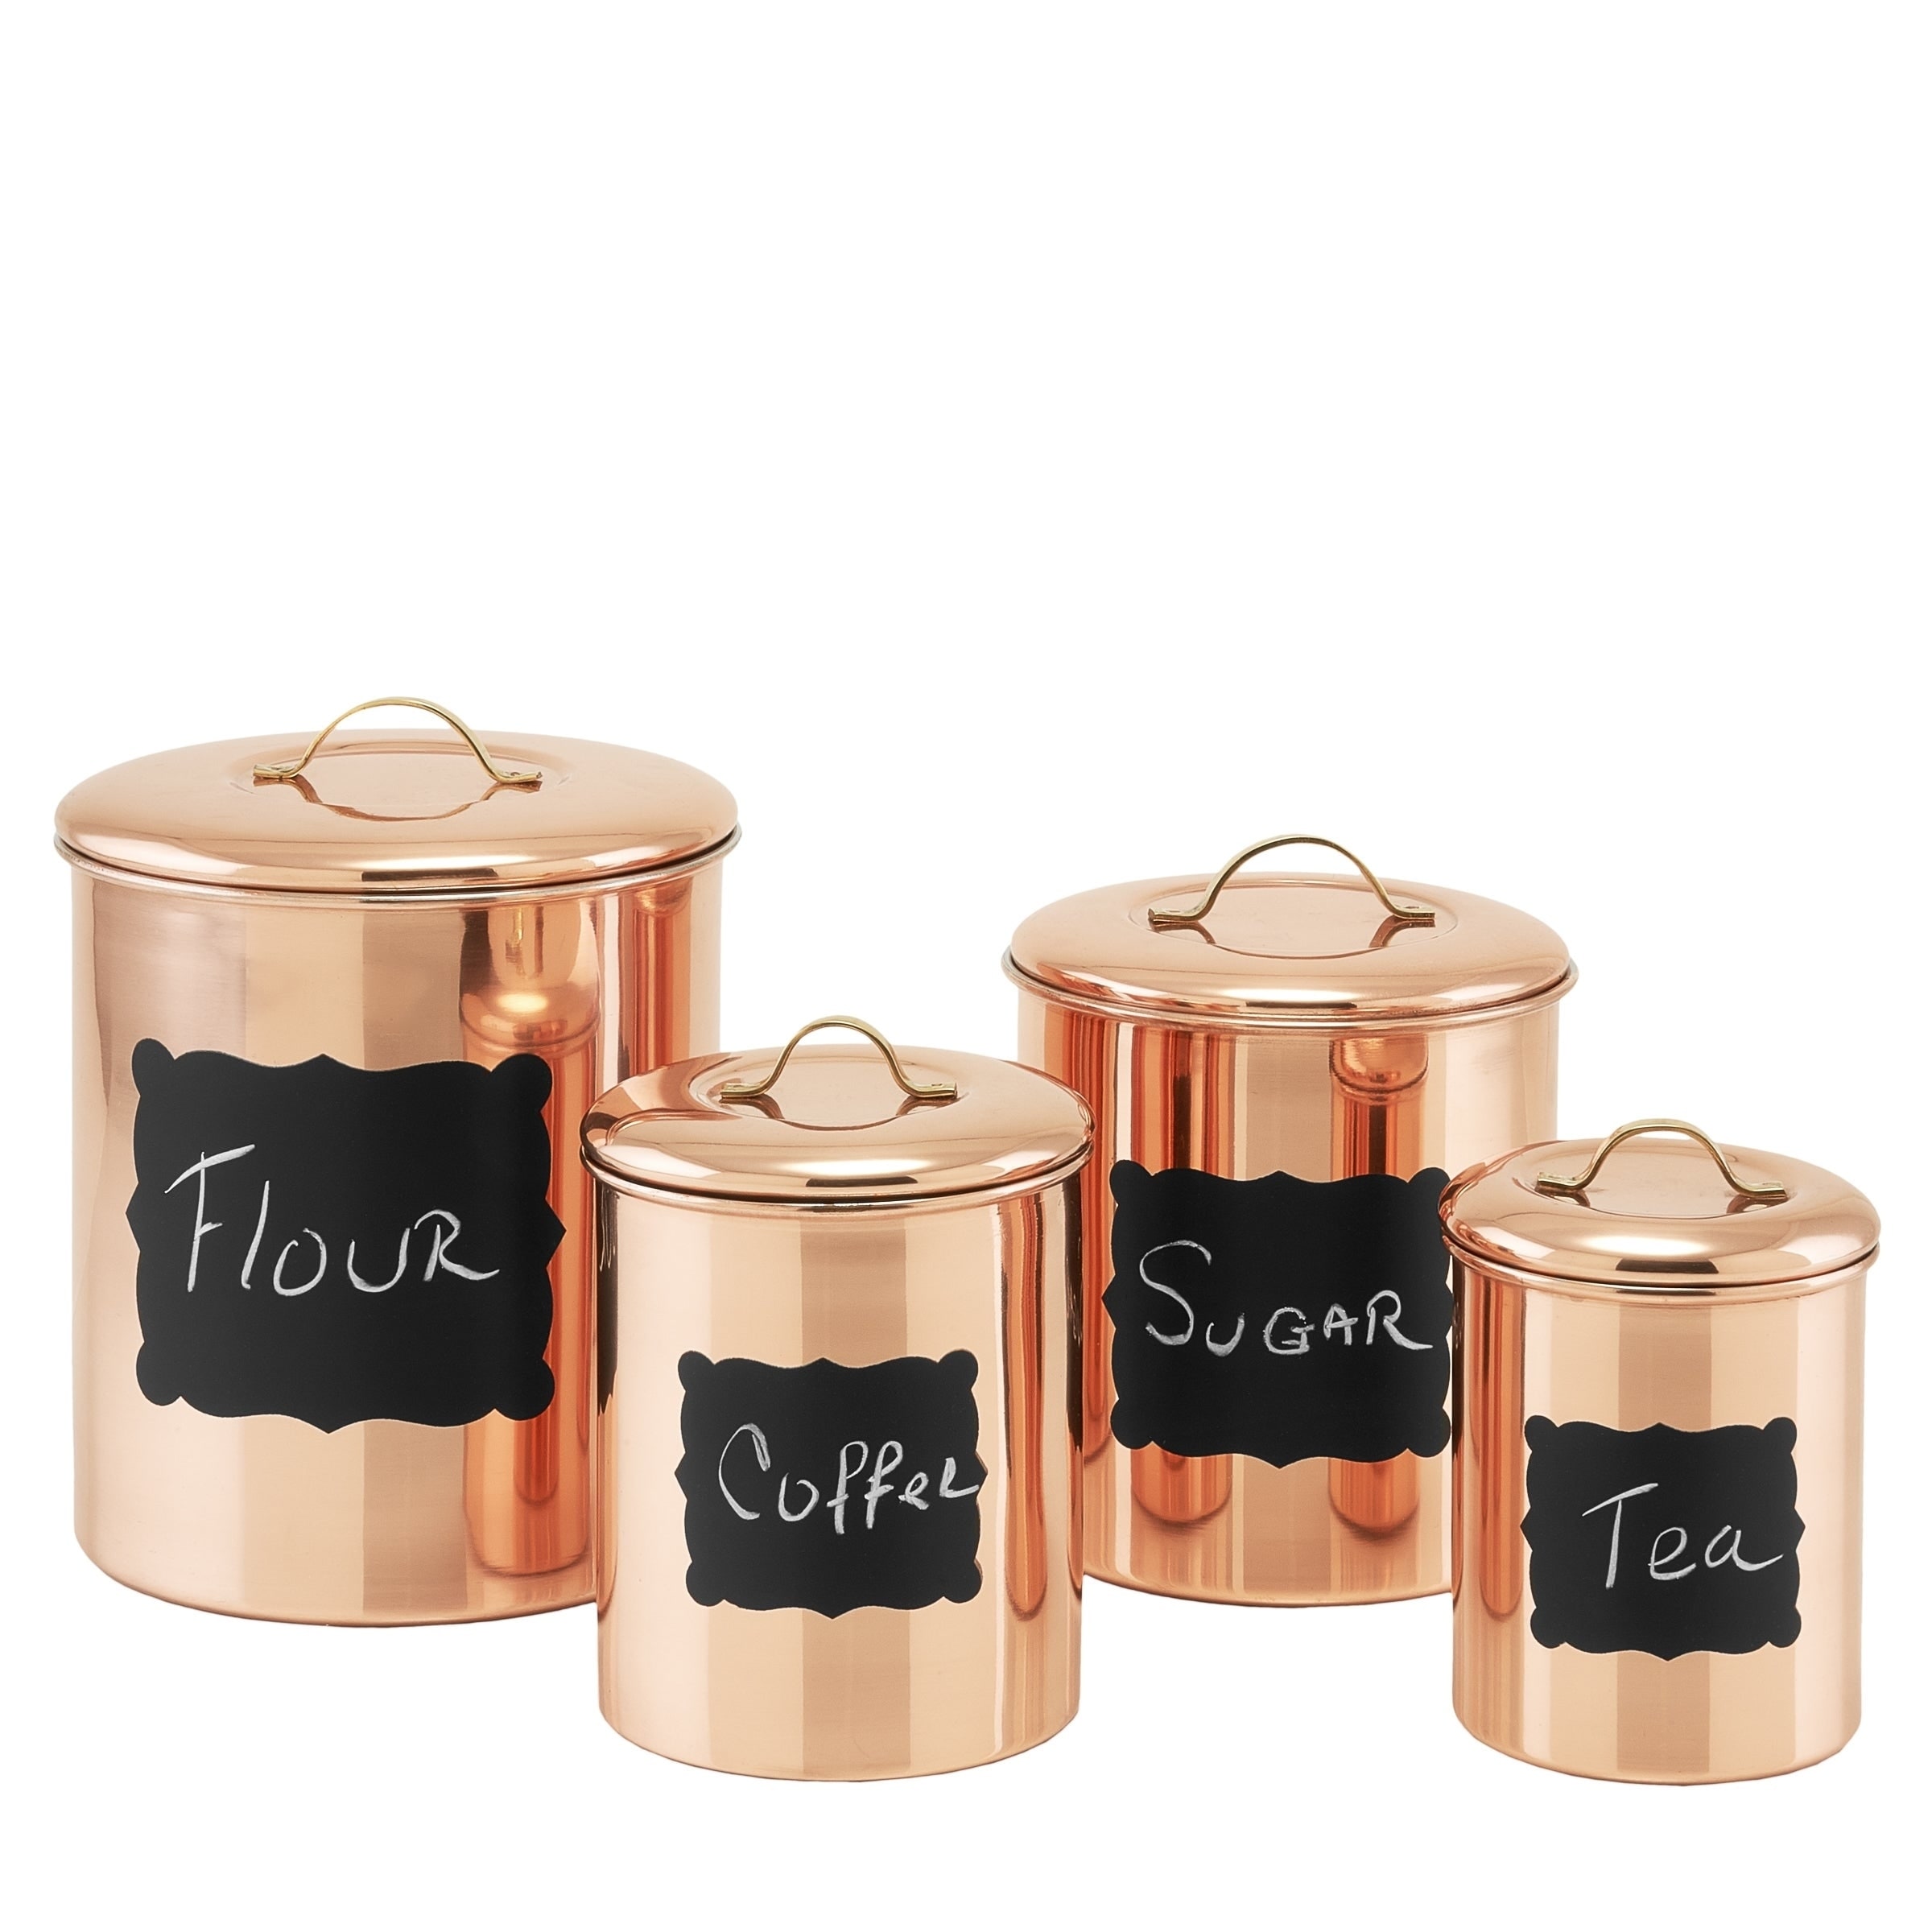 Pantry Countertop Storage Display Jars Decor Copper Hammered Steel Canister Set